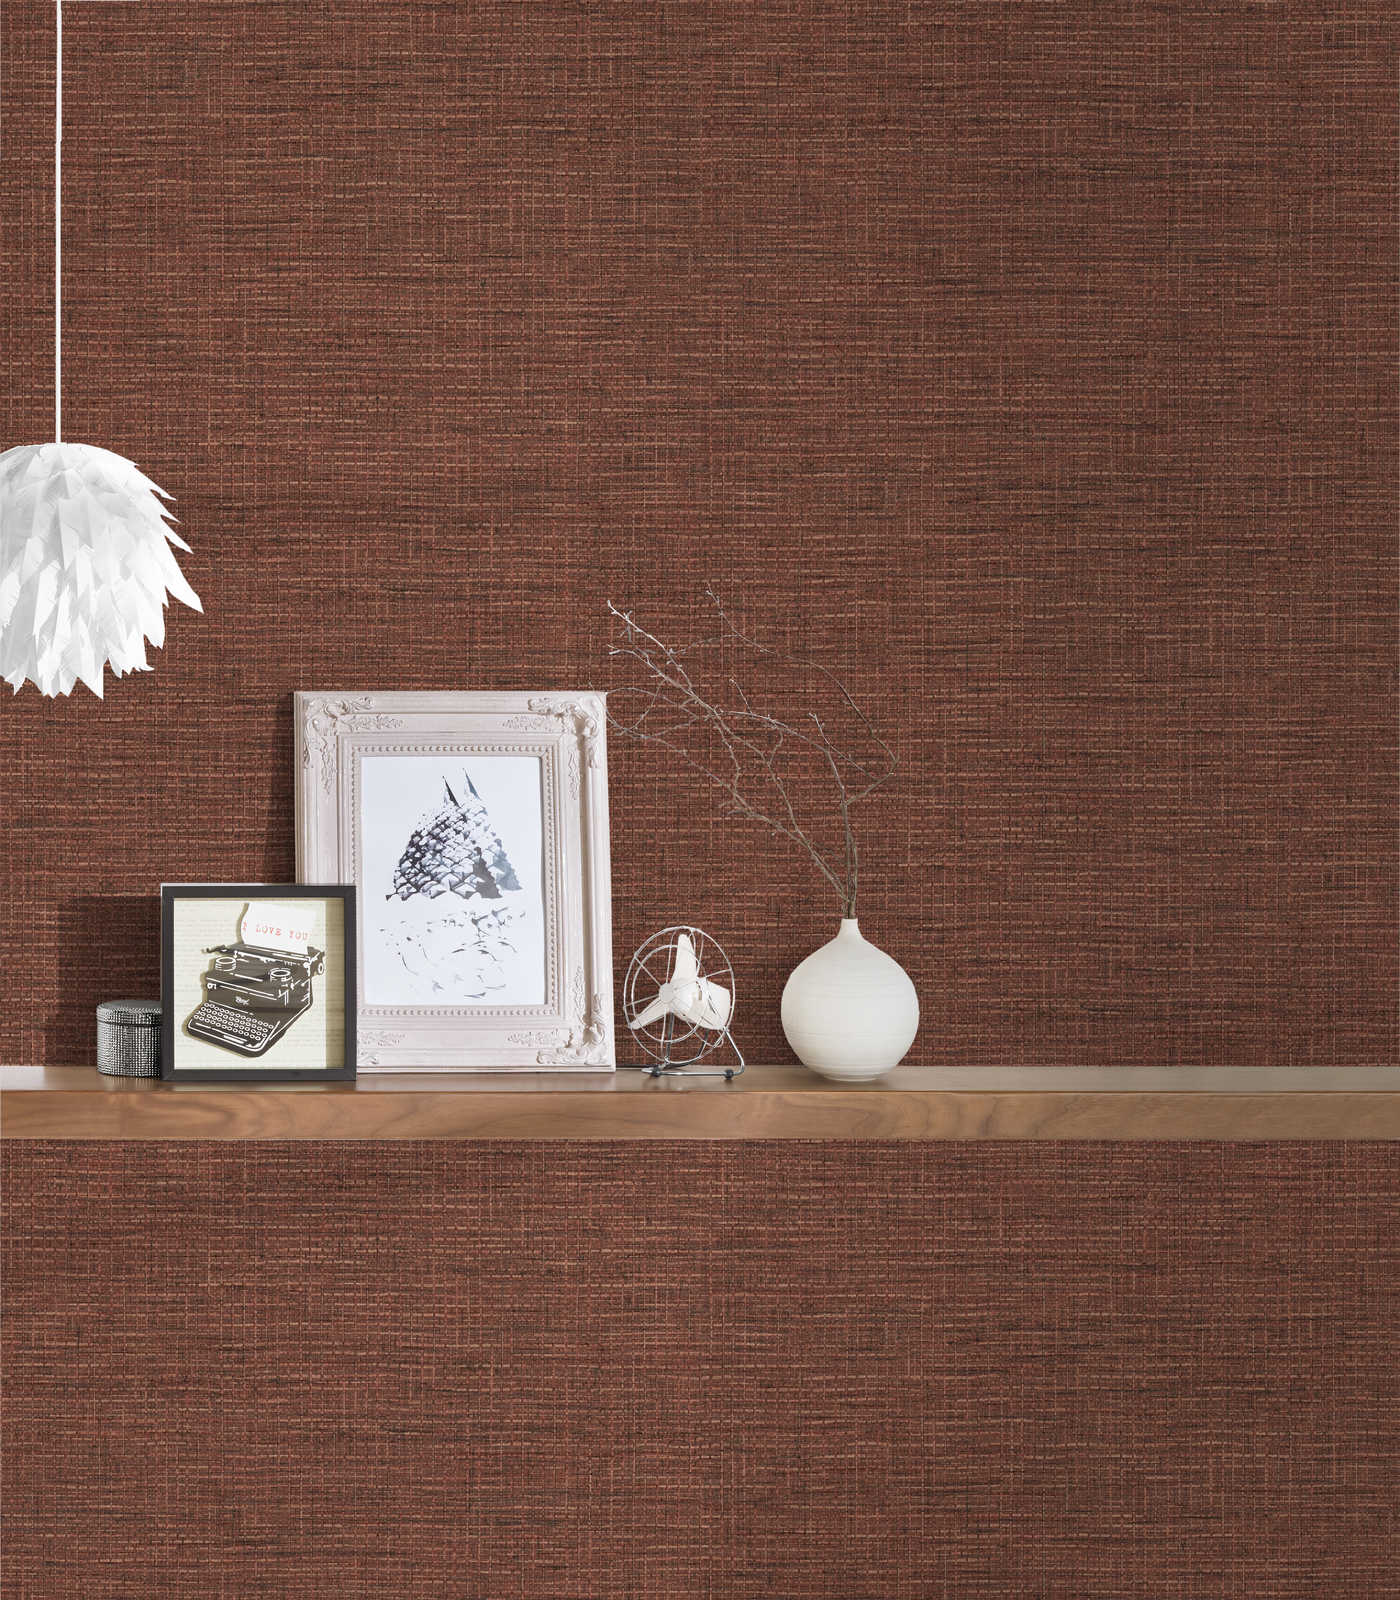             Red wallpaper with raffia pattern & fabric look
        